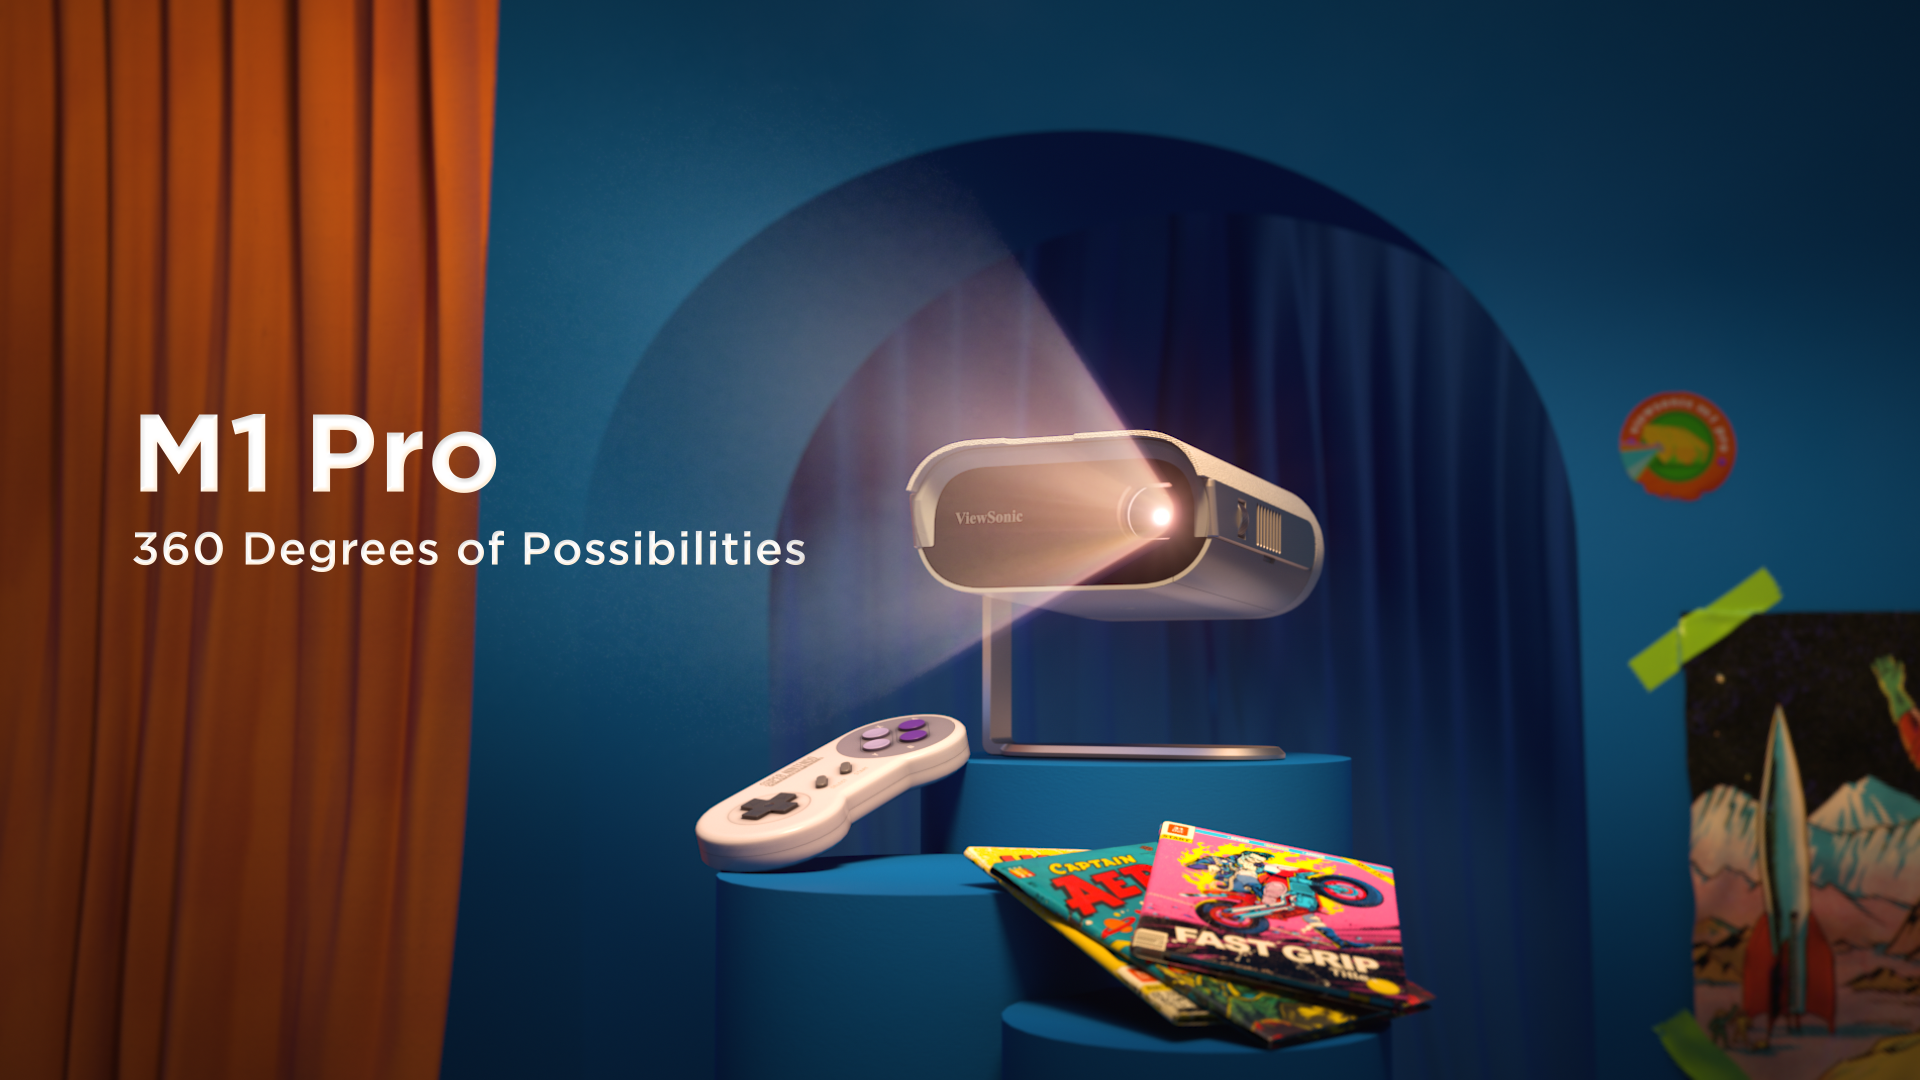 ViewSonic Introduces Smart LED Portable Projector ‘M1 Pro’ Projecting 360 Degrees with a Flexible Smart Stand